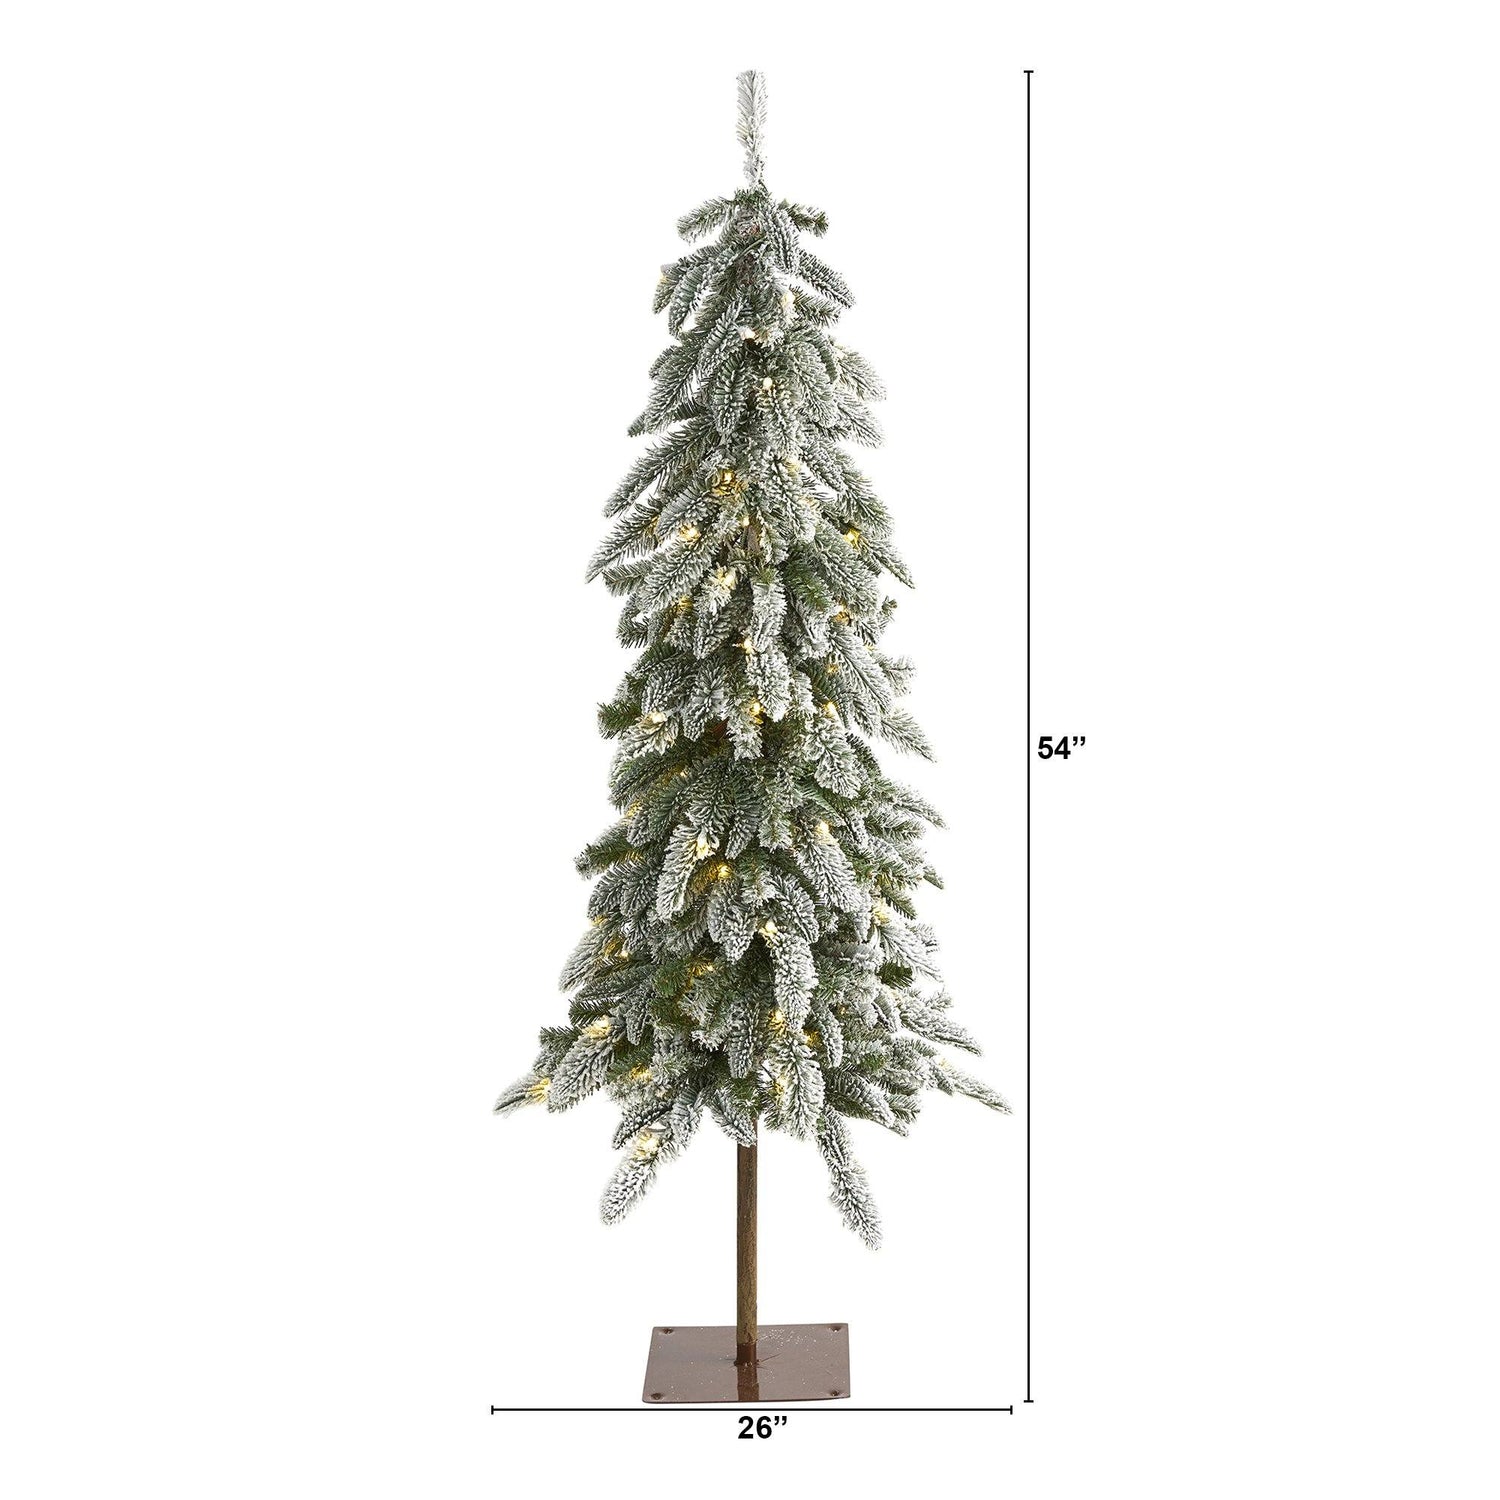 4.5’ Flocked Washington Alpine Artificial Christmas Tree with 100 White Warm LED Lights and 285 Bendable Branches